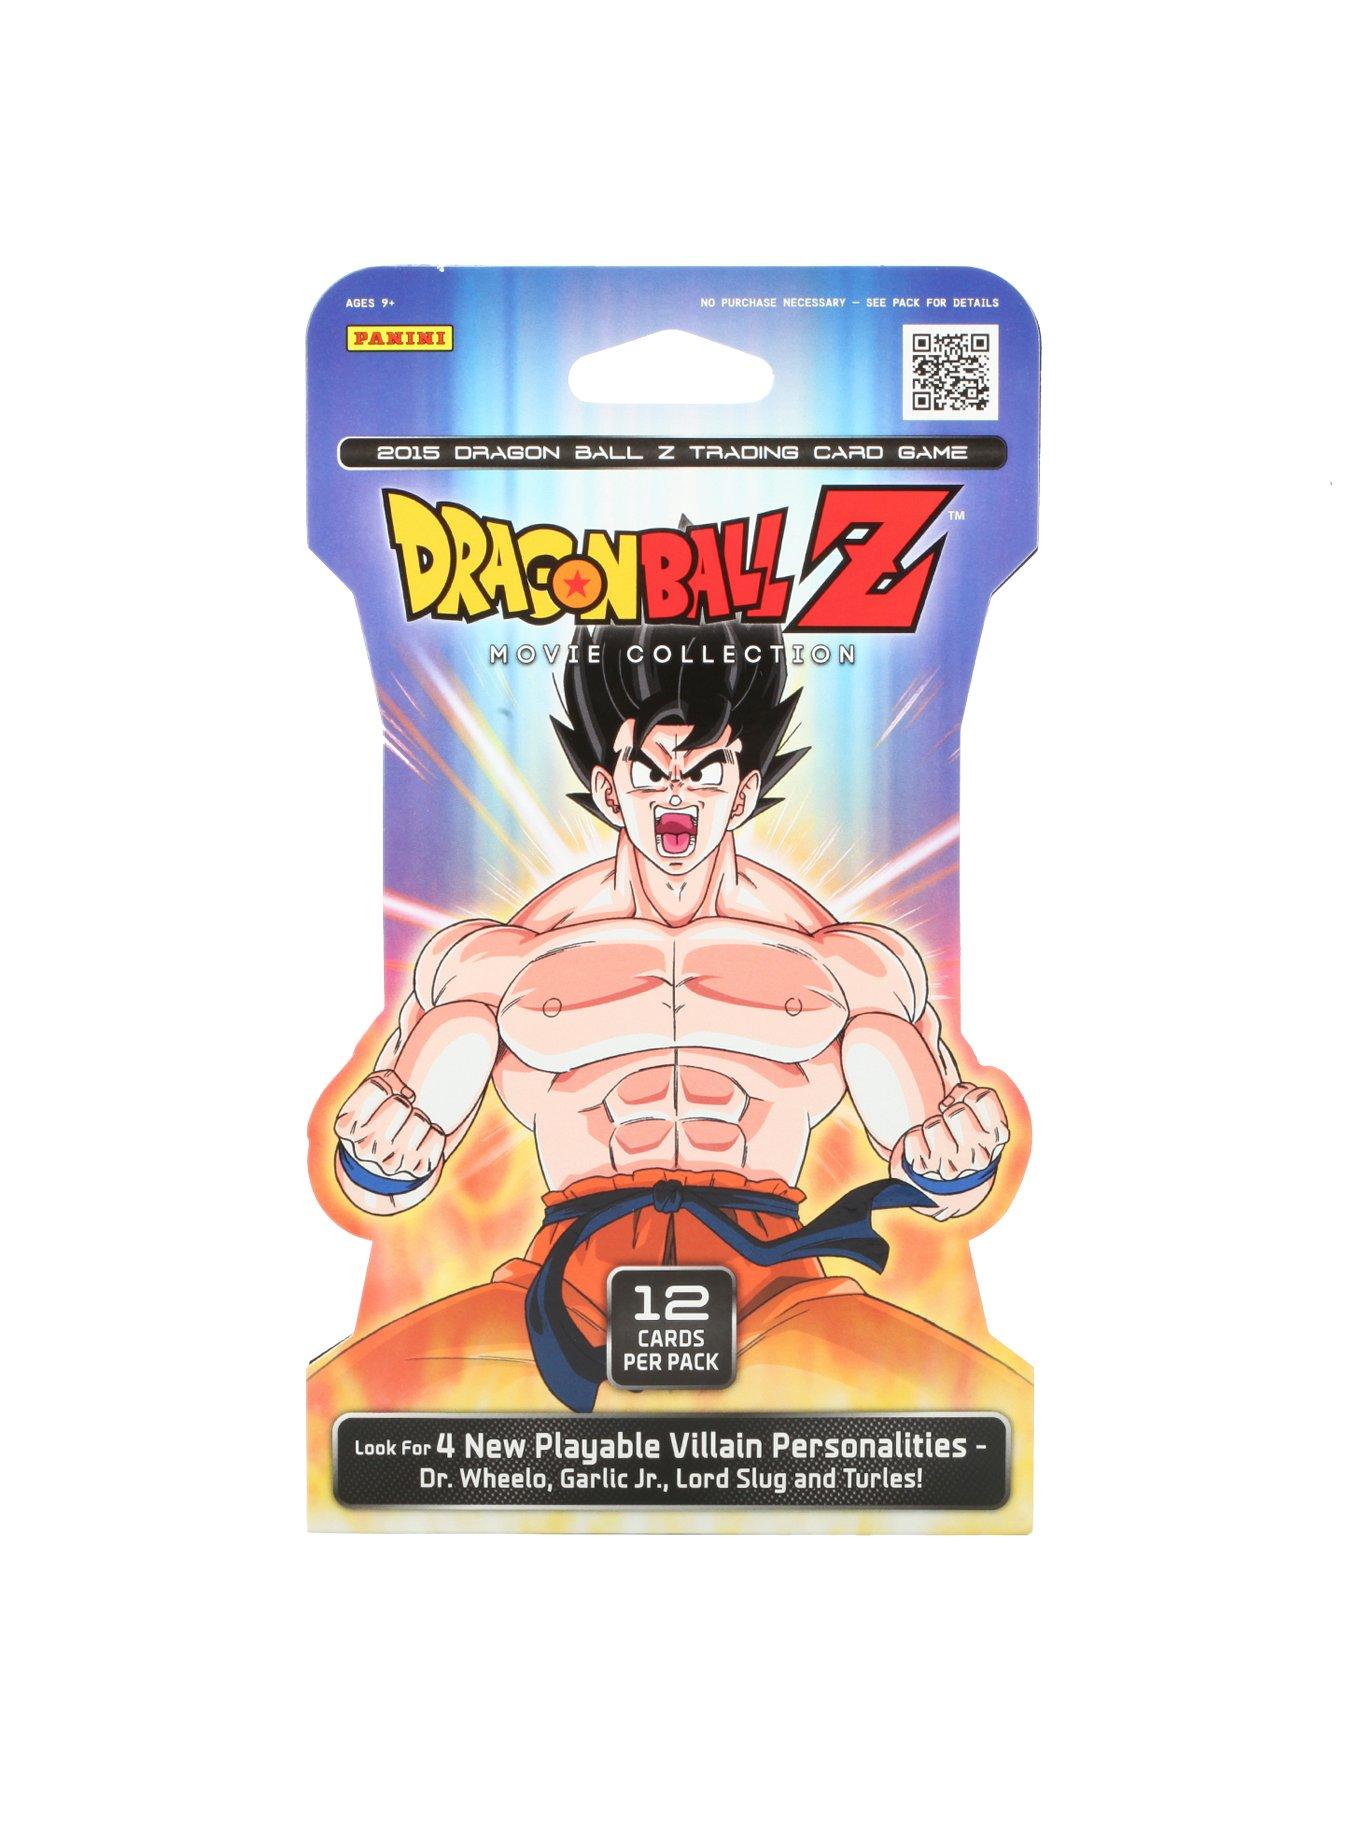 Dragon Ball Z Movie Collection 2015 Panini Booster Box Opening! 